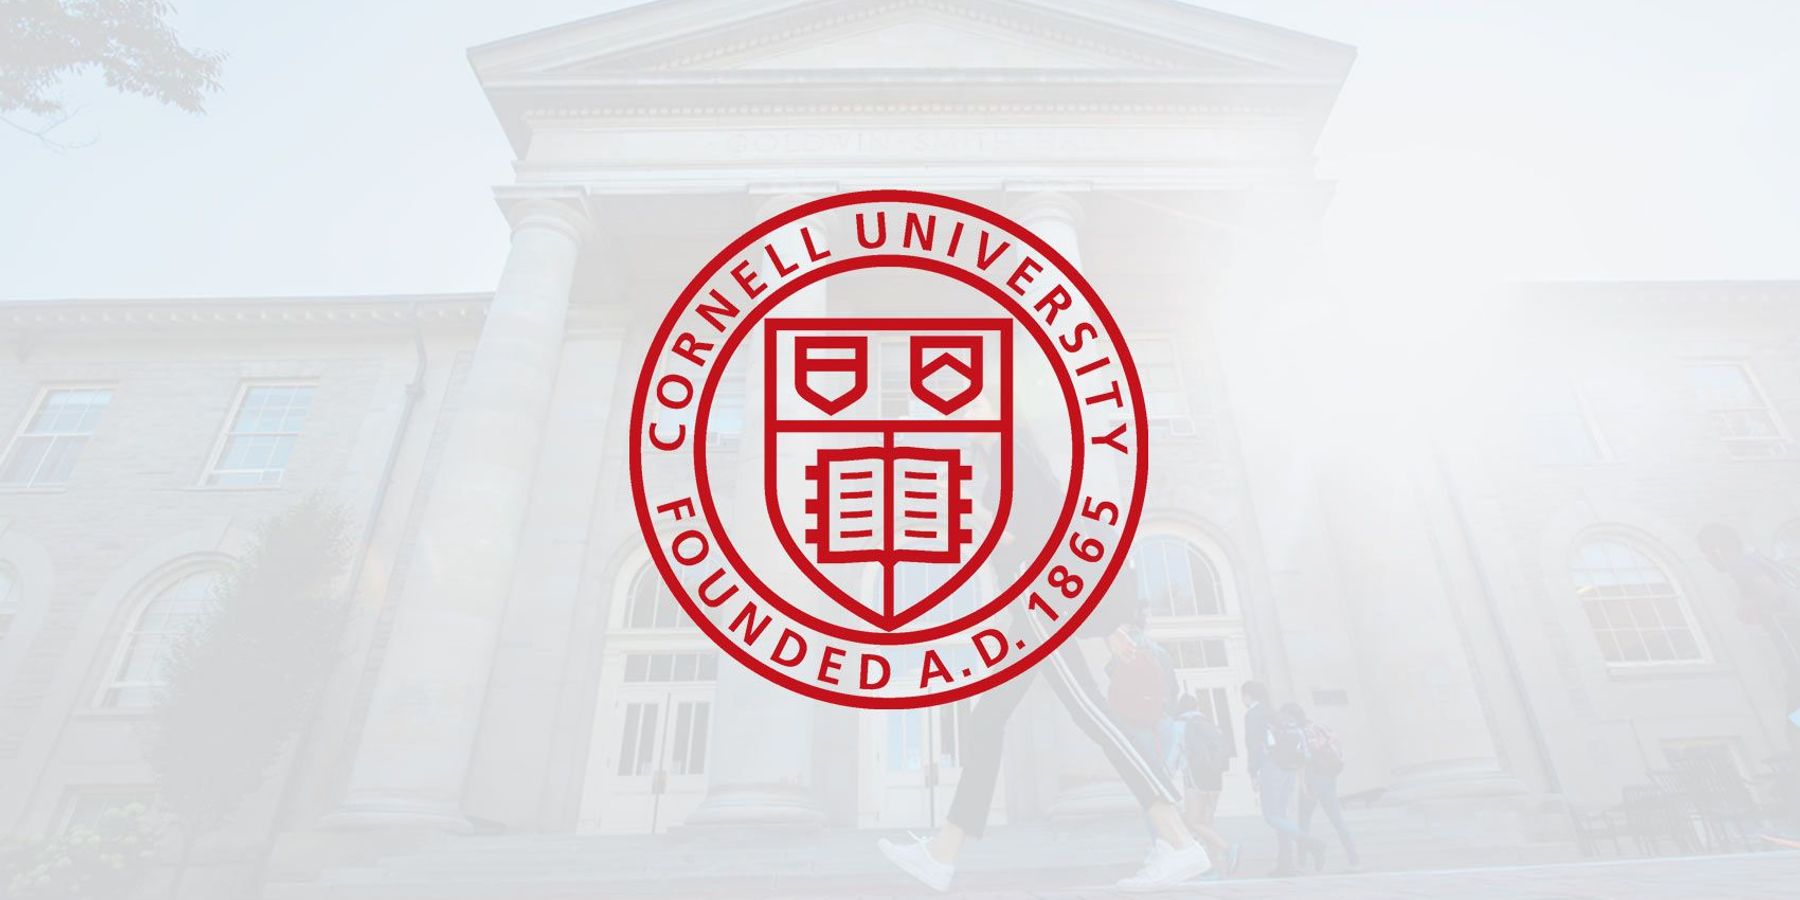  Cornell University chose Cornerstone to provide a true enterprise system dedicated to promoting learning in a large, decentralized educational environment